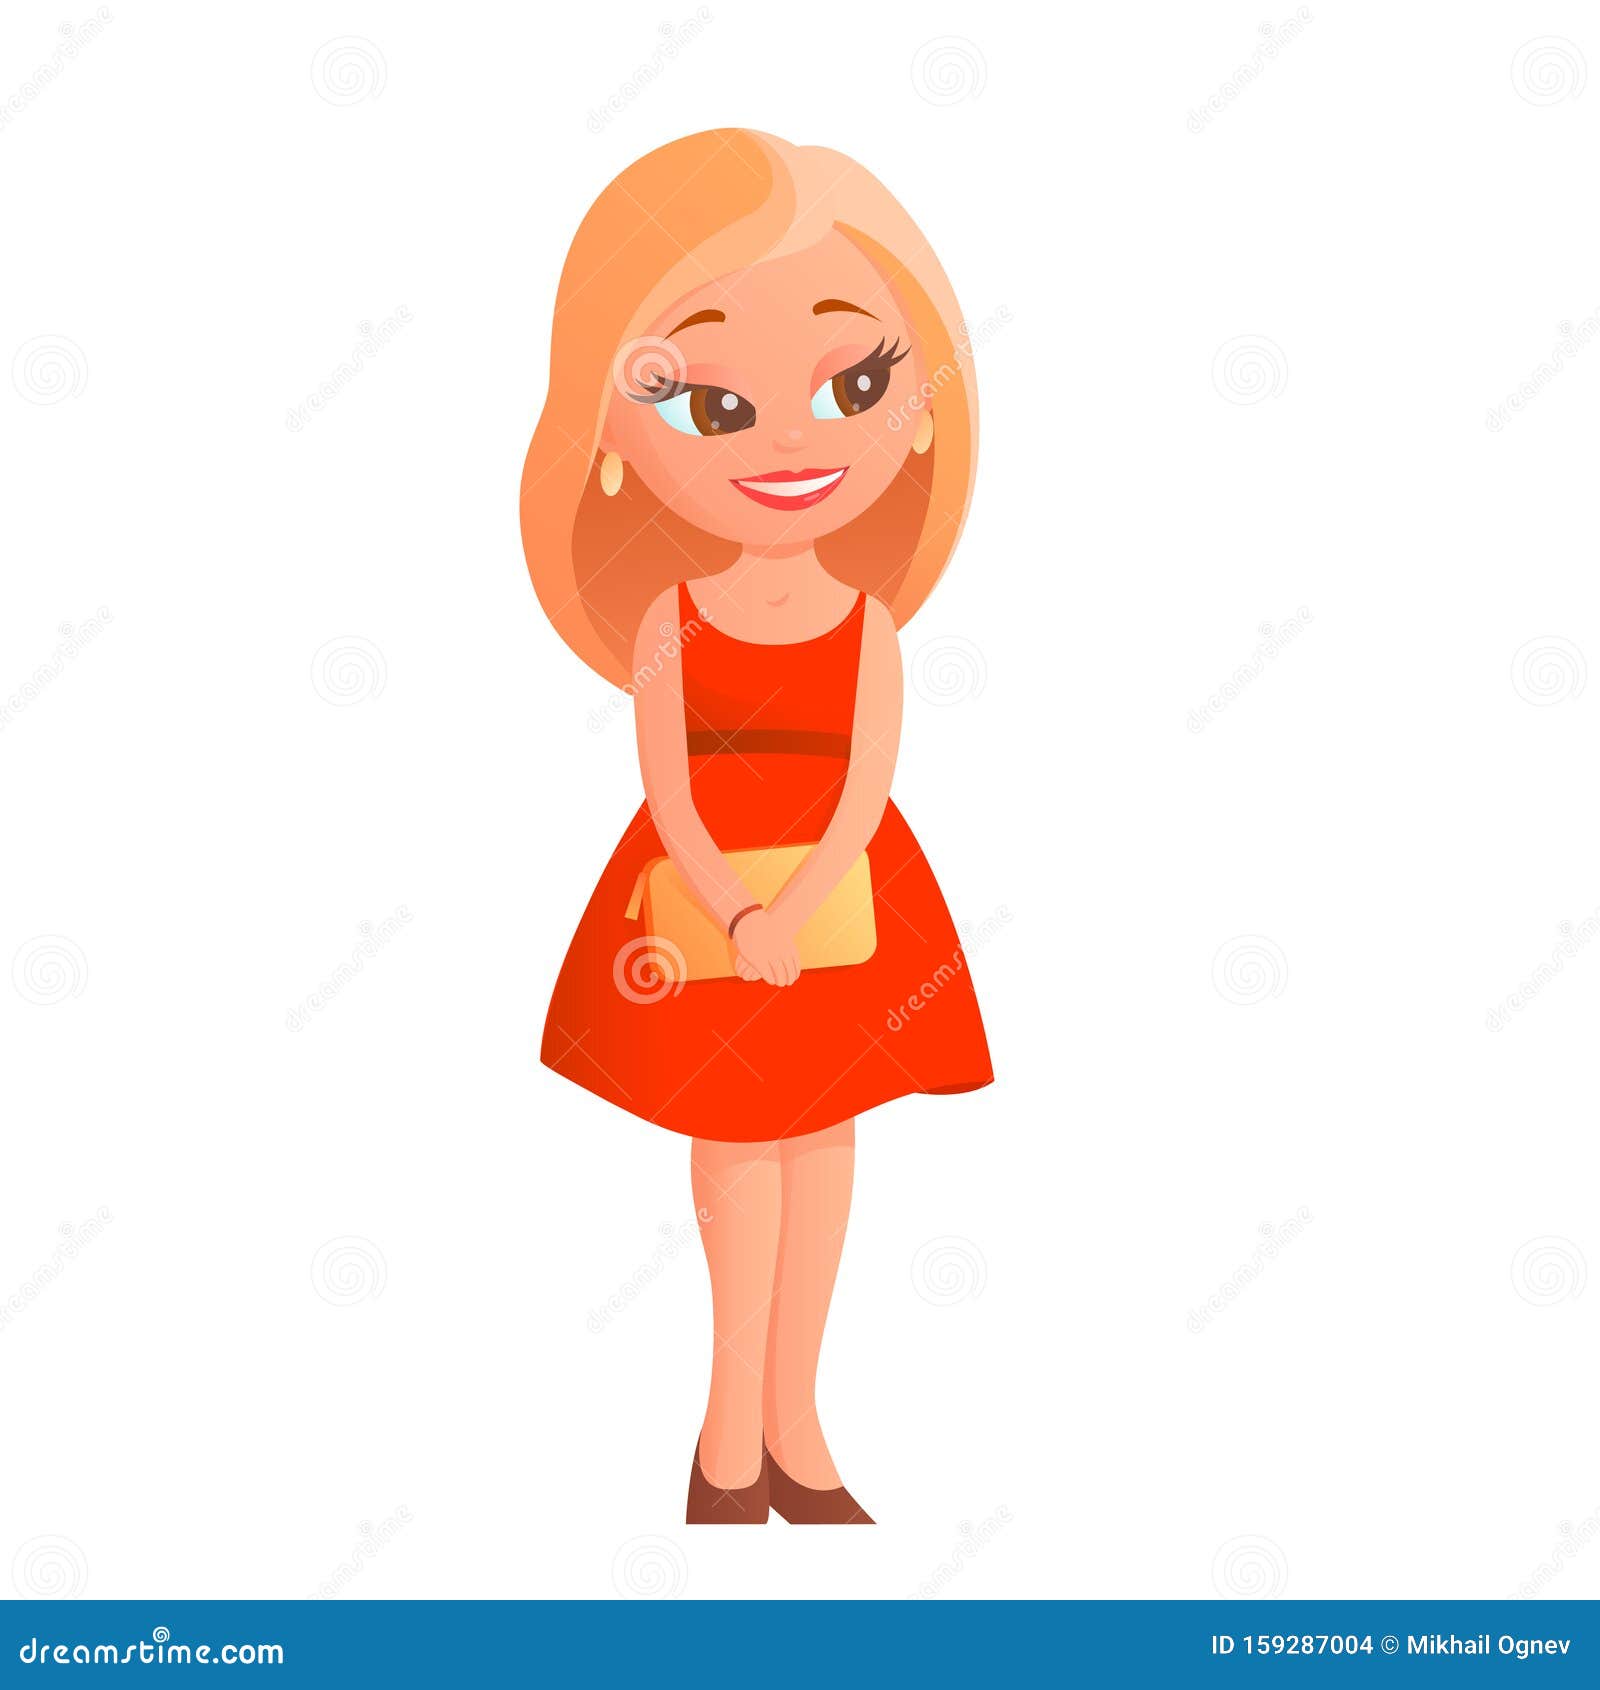 Cartoon girl in red dress stock vector. Illustration of person - 159287004